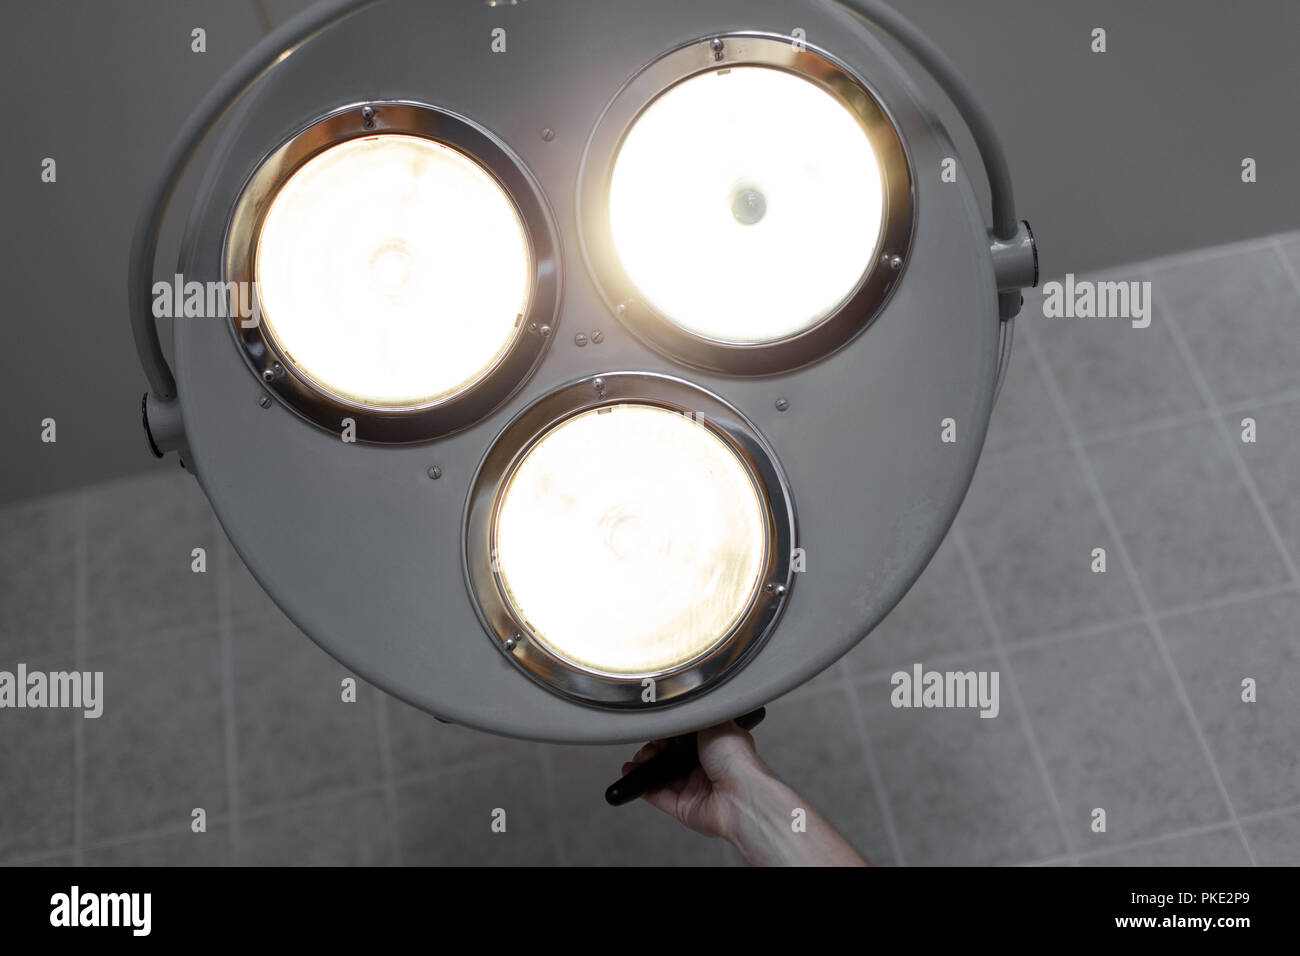 Bright light from the operating lamp. Medical equipment Stock Photo